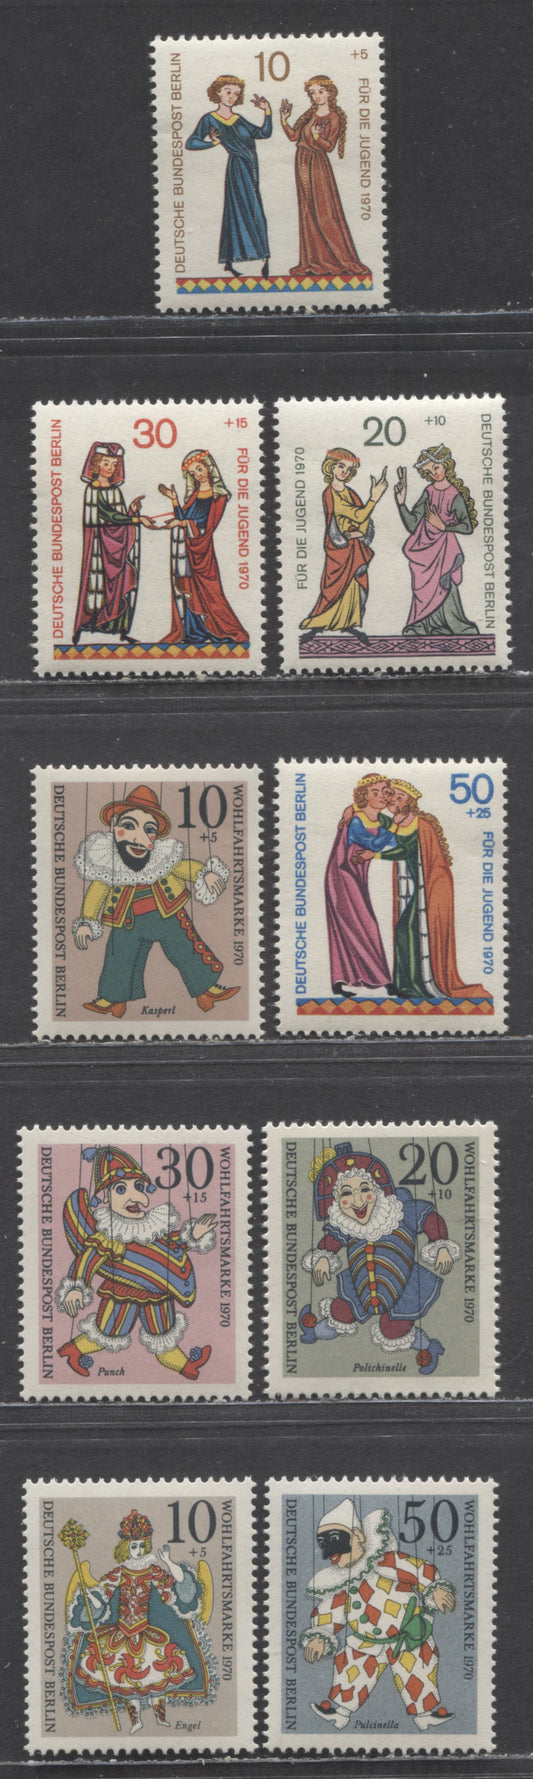 Berlin-Germany SC#9NB70-9NB78(Mi#354/378) 1970 SemiPostals Issue, 9 VFNH Singles, Click on Listing to See ALL Pictures, Estimated Value $5 USD